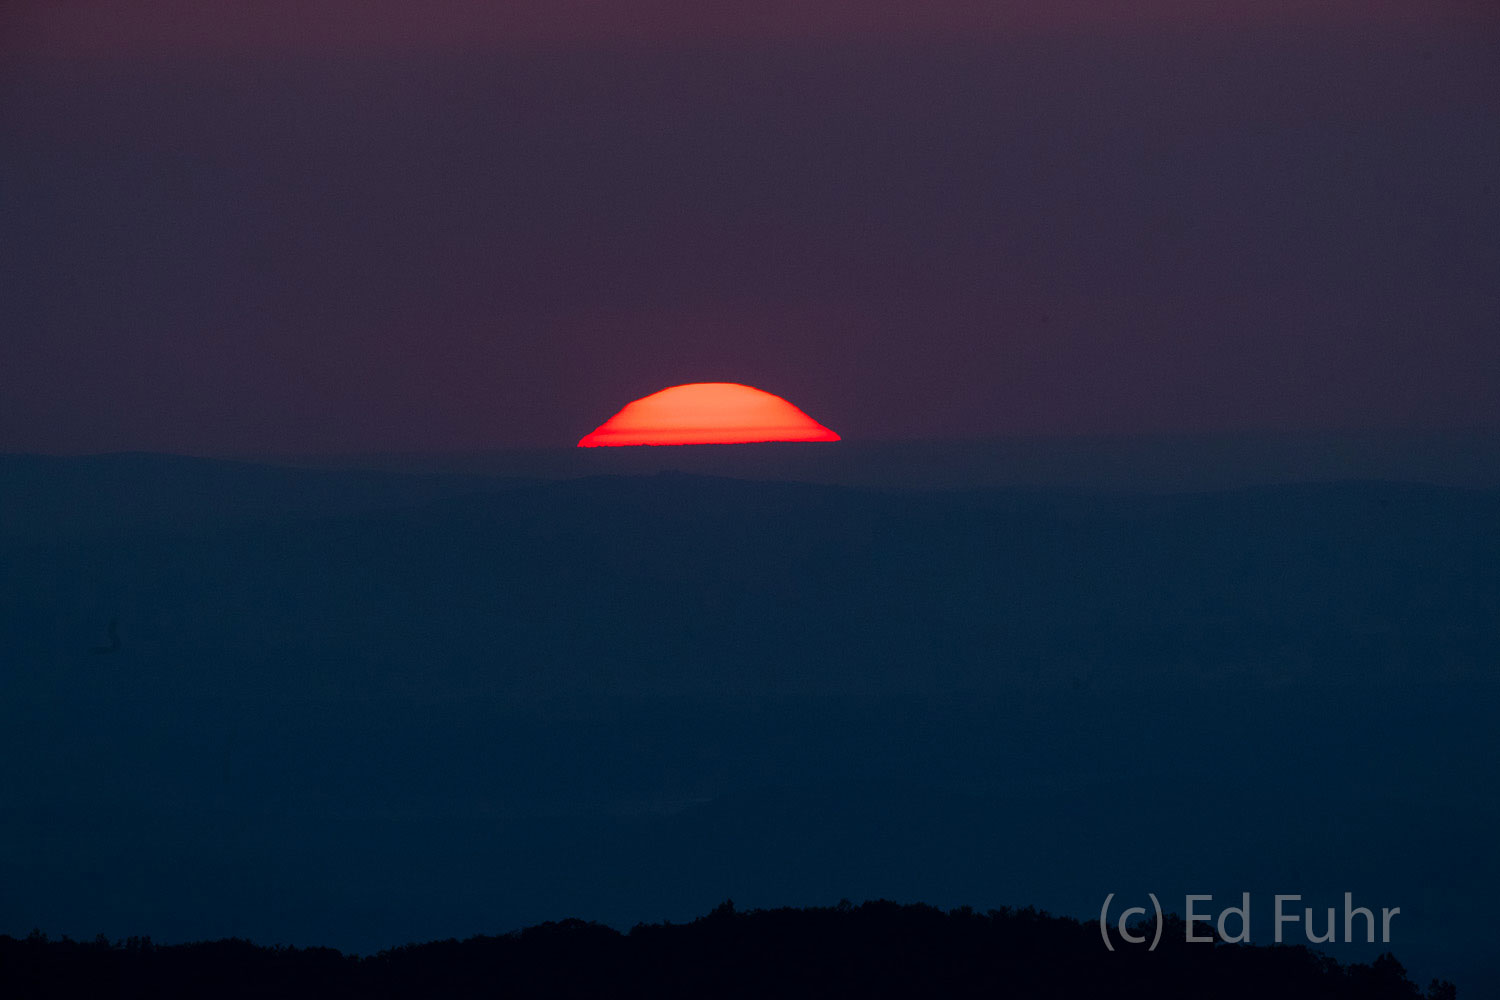 A blood red sun rises above the eastern horizon.